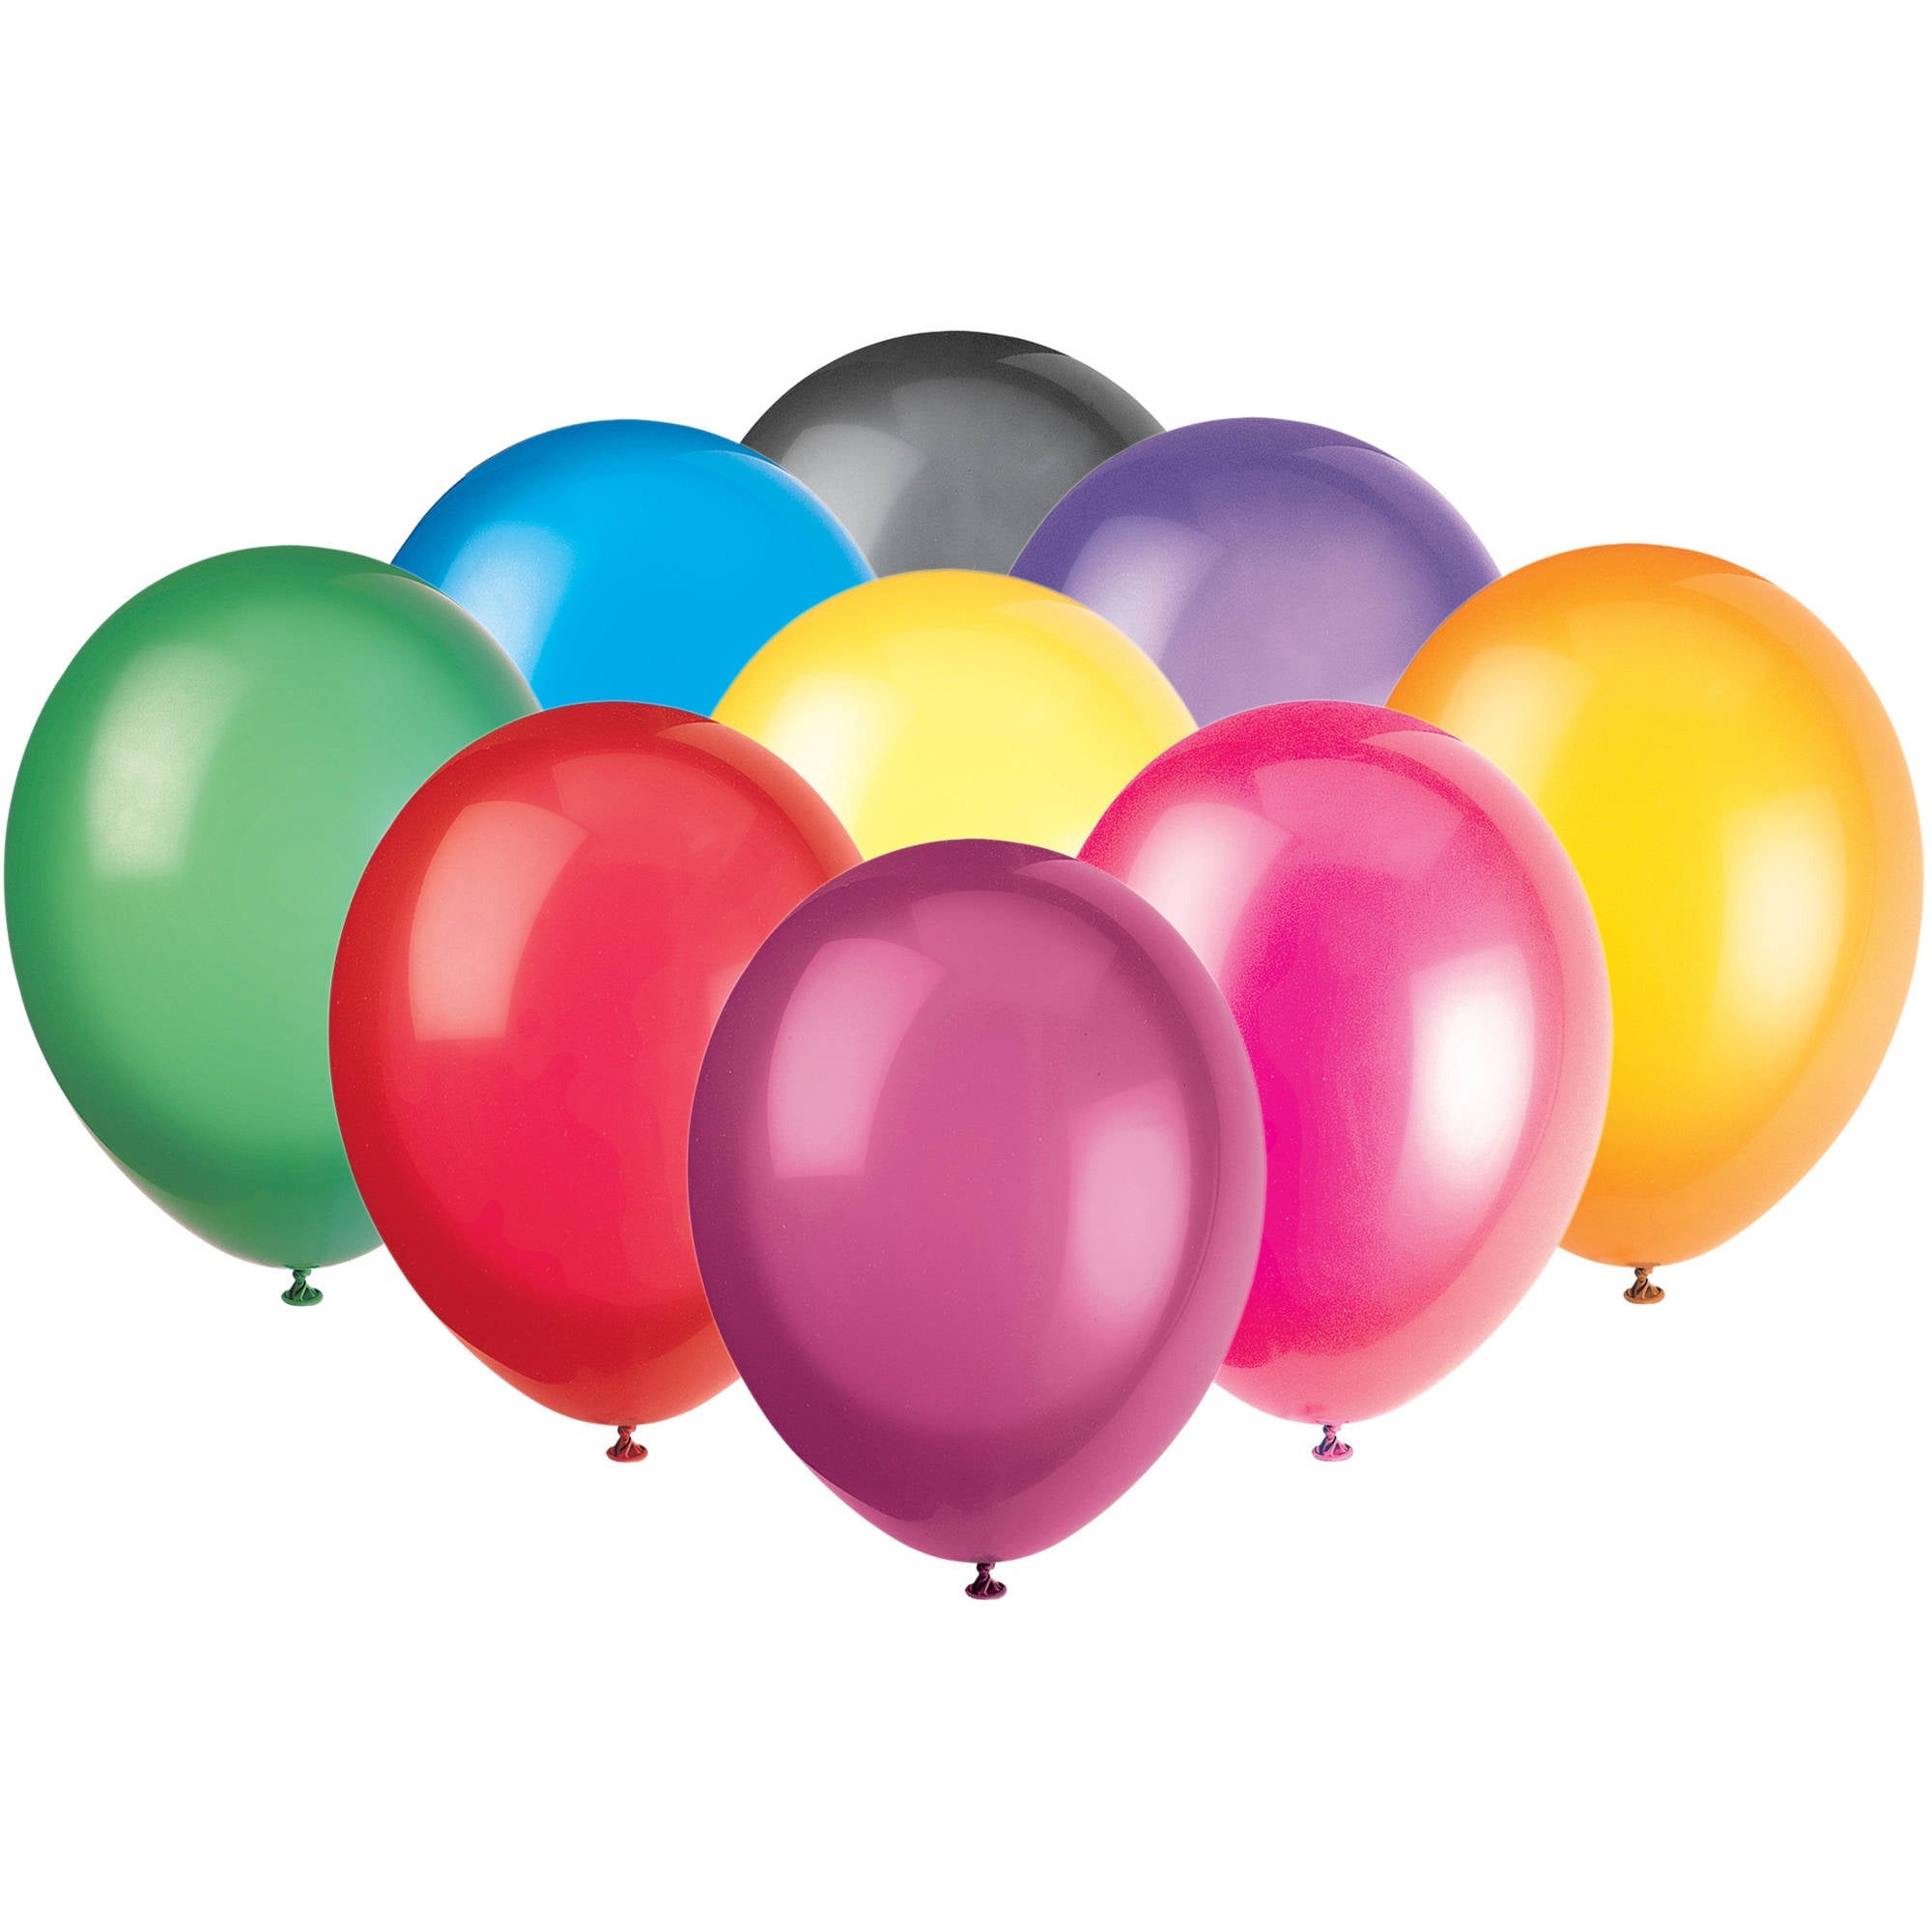 Unique BALLOONS 12" Premium Crystal Latex Balloons, 50ct - Assorted Colors